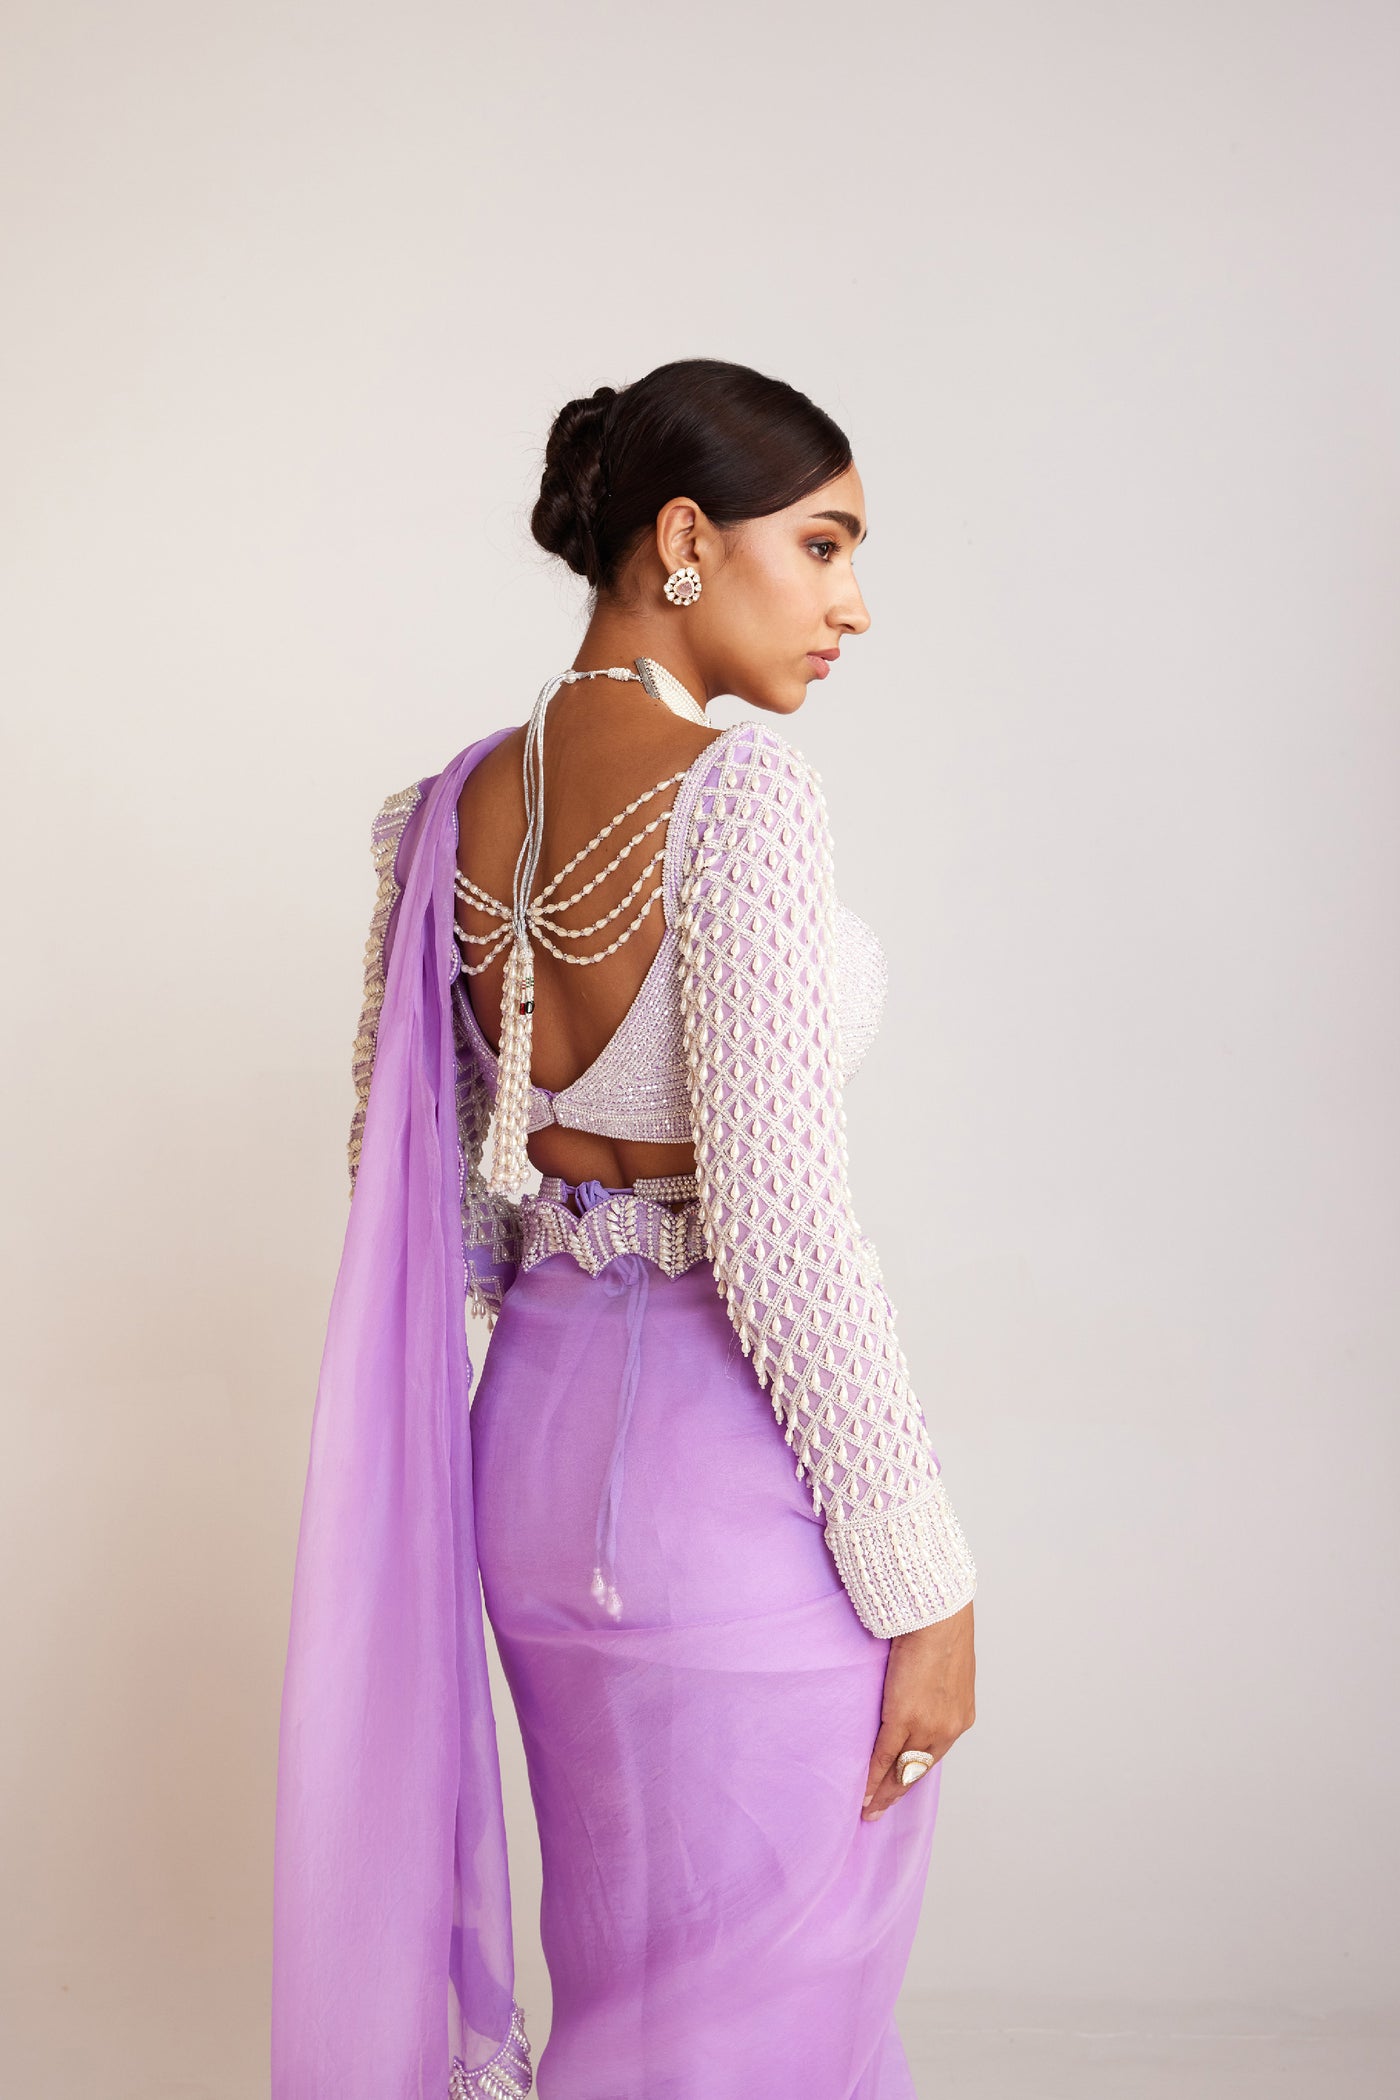 V Vani Vats Lilac Pearl Embellished Saree Paired With Pearl Drop Full Sleeves Blouse Indian designer wear online shopping melange singapore